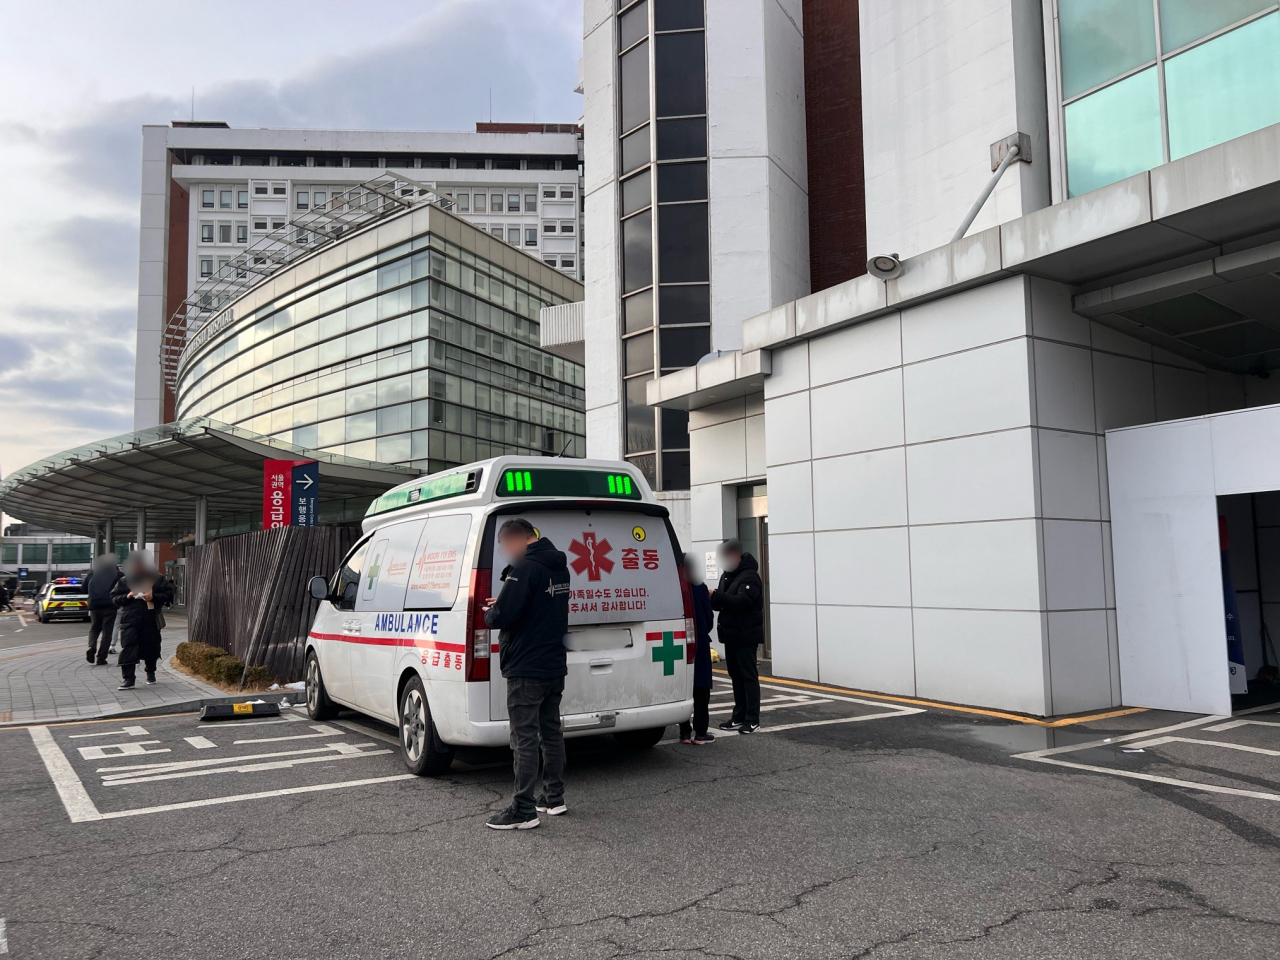 A woman and 119 paramedics wait in front of the ambulance at Seoul National University Hospital in Jongno-gu, central Seoul, Friday. (Park Jun-hee/The Korea Herald)